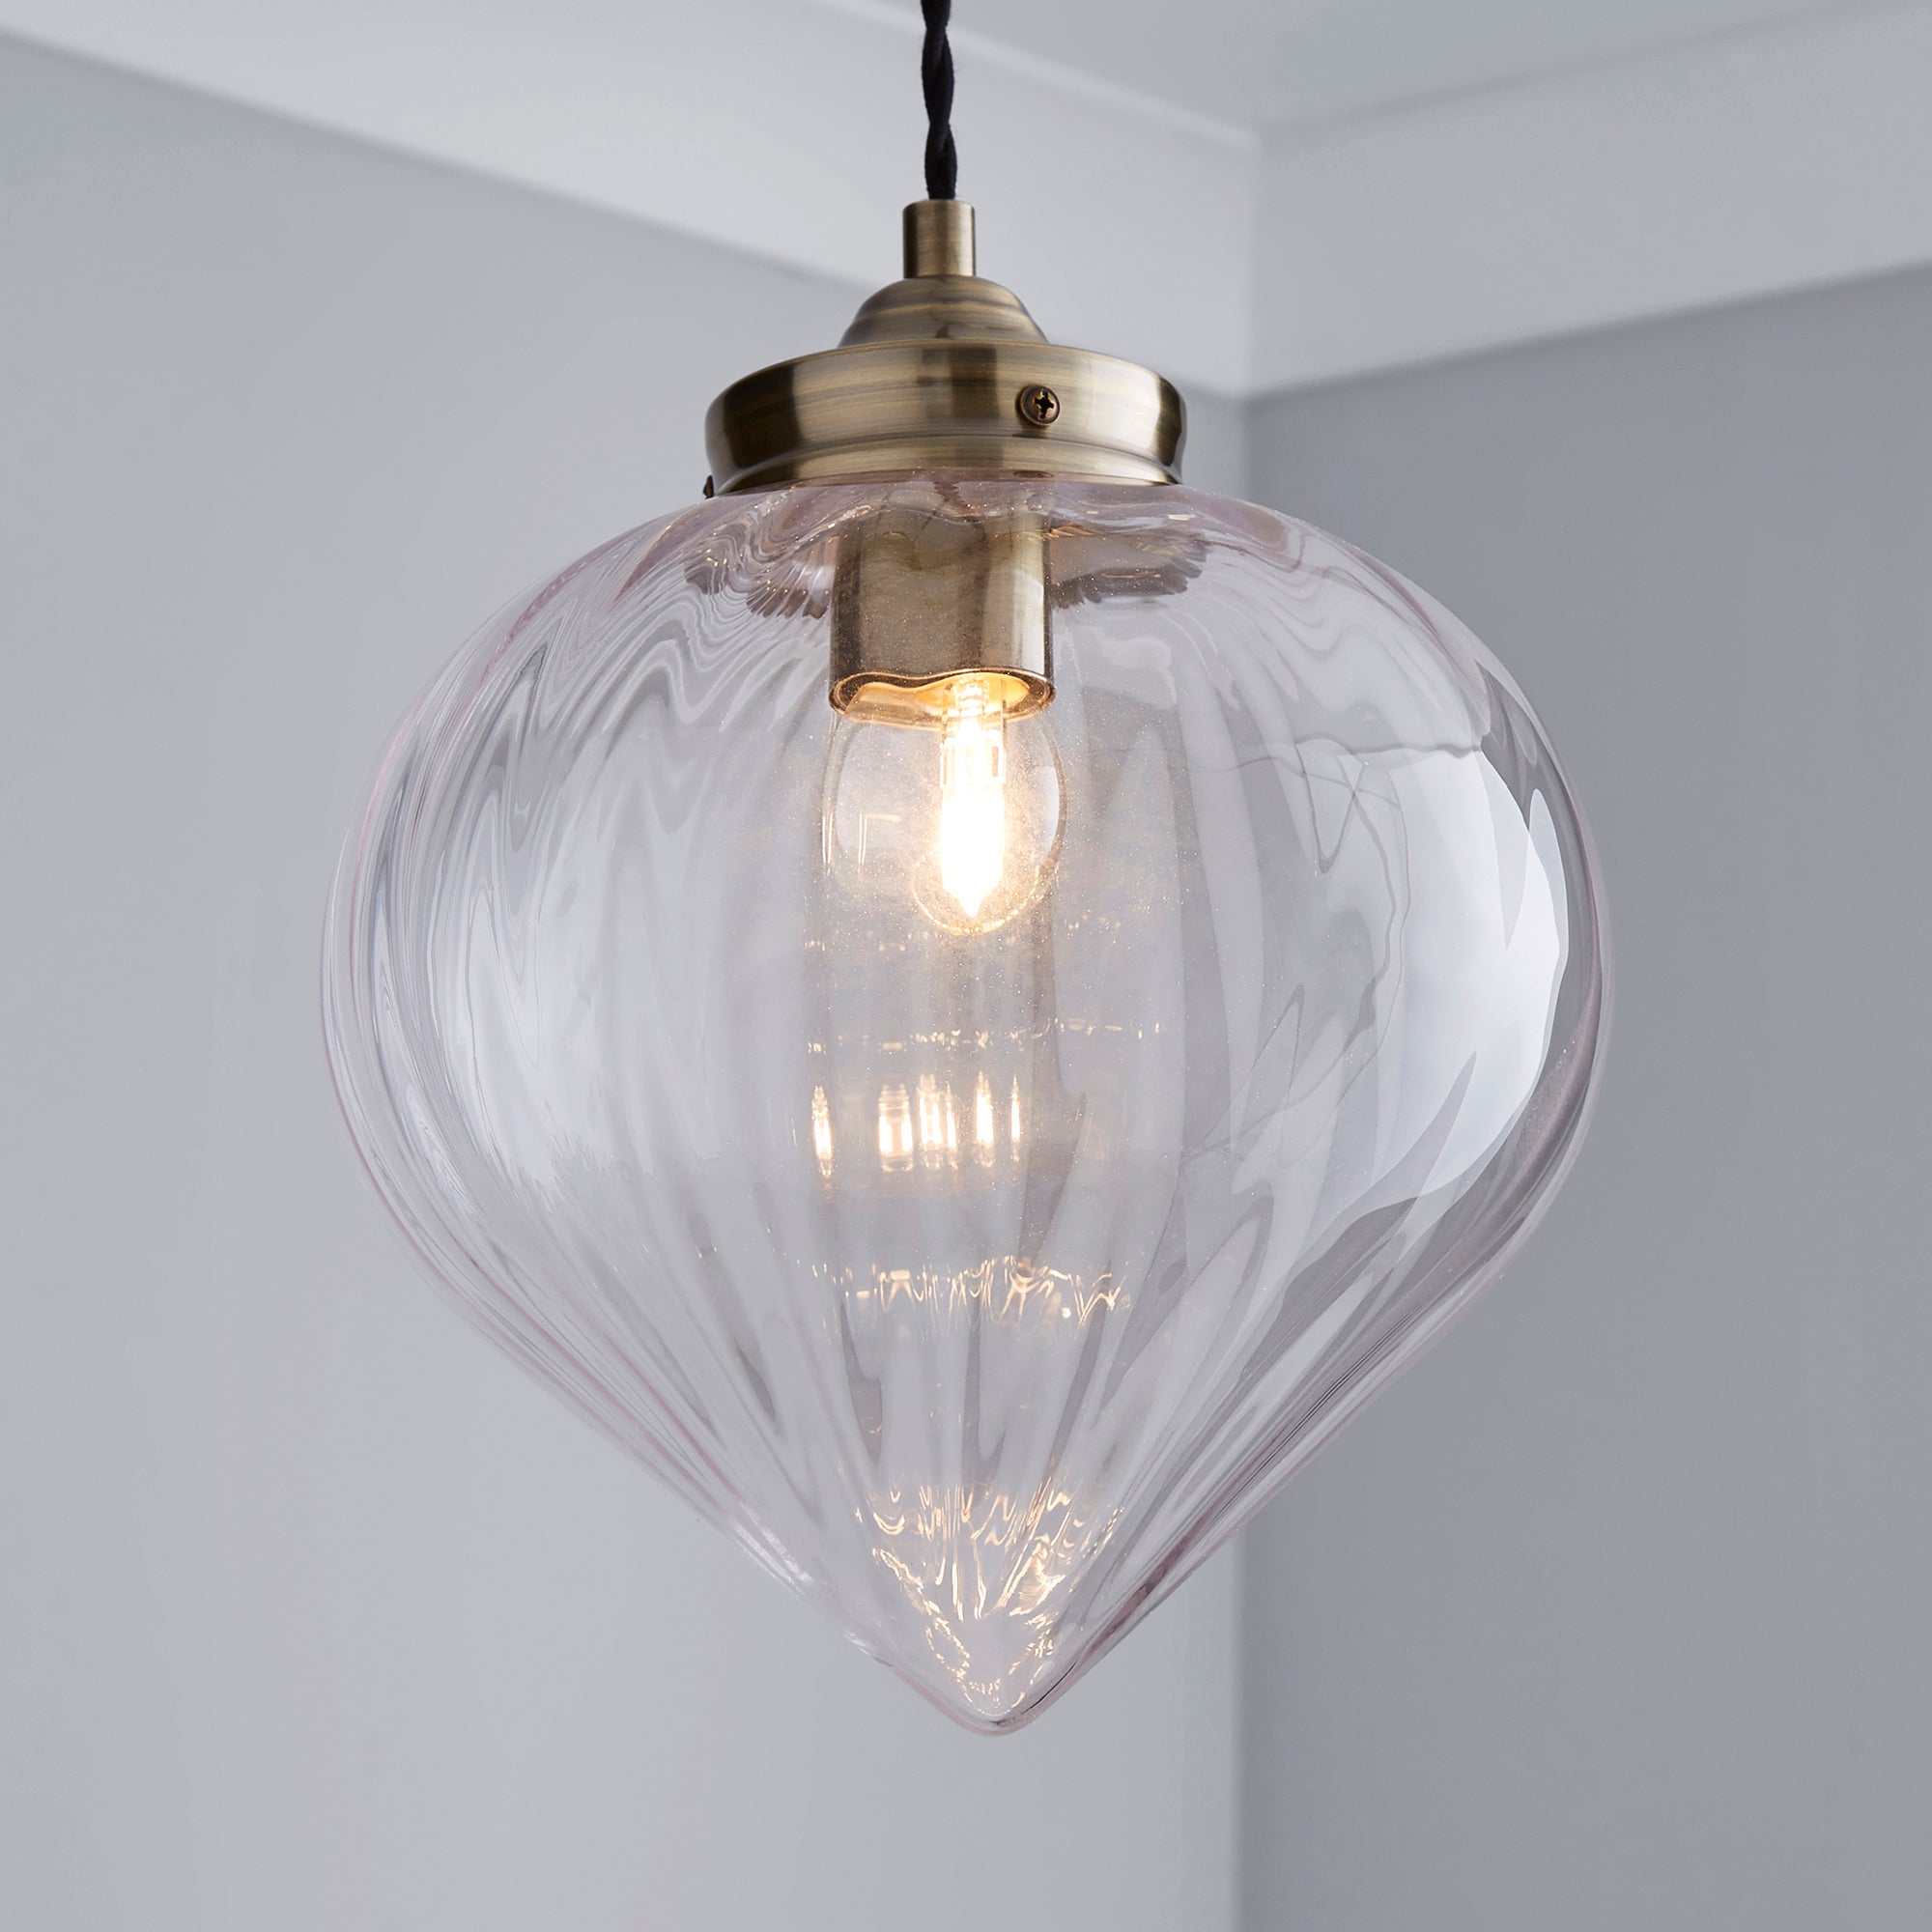 Rio Voyager Ribbed Glass Pendant Light